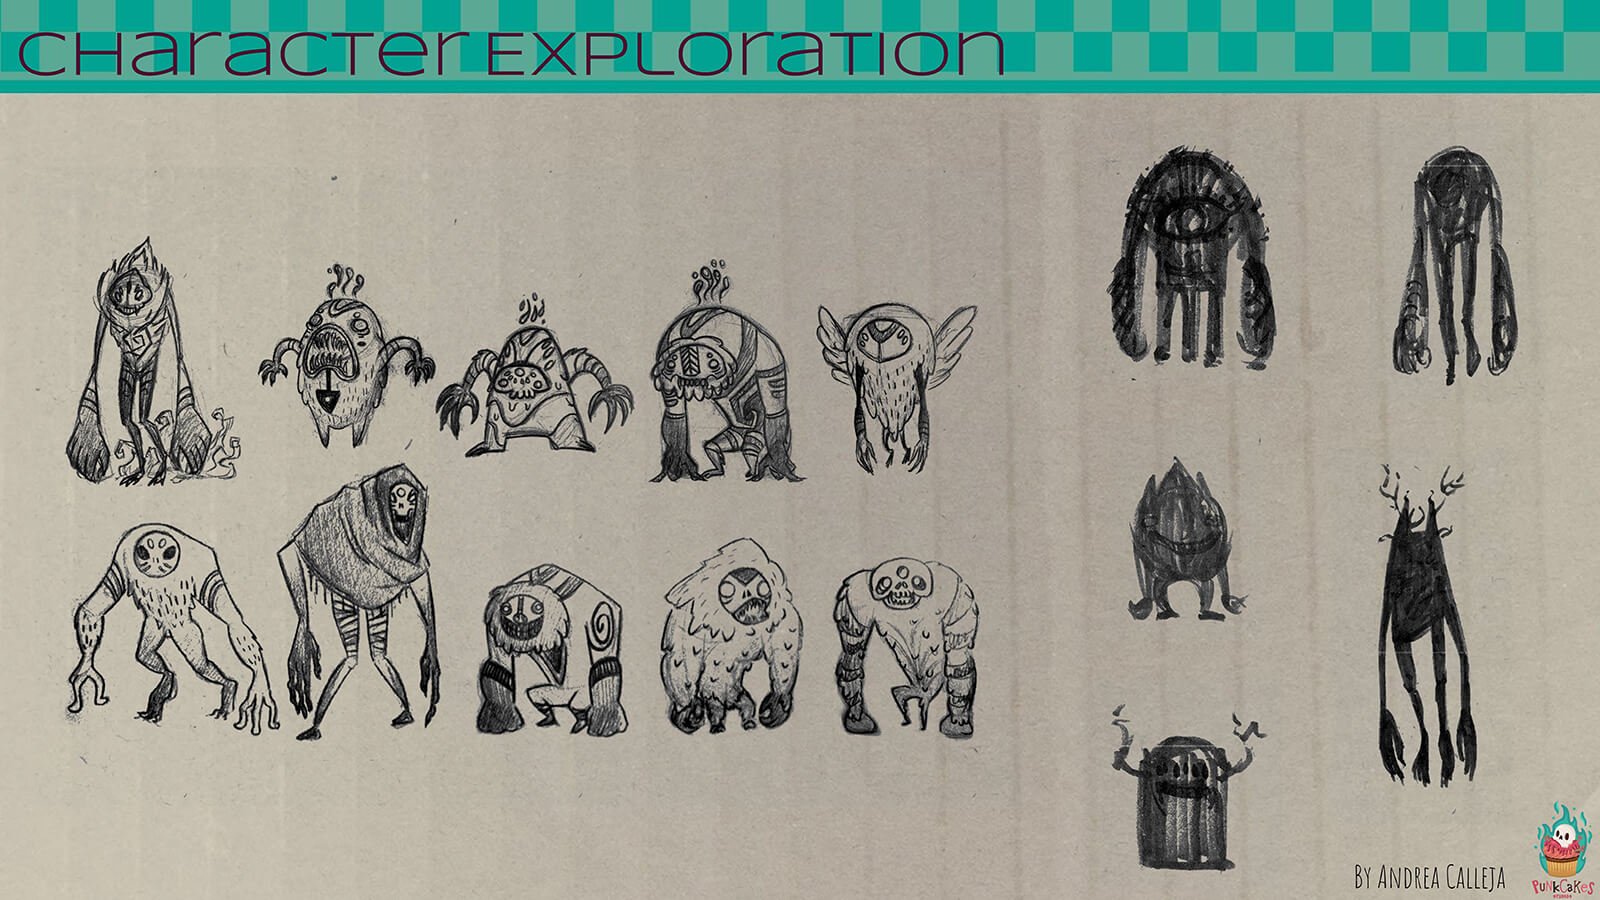 A "character exploration" sheet, exploring different designs for the film's alien character.